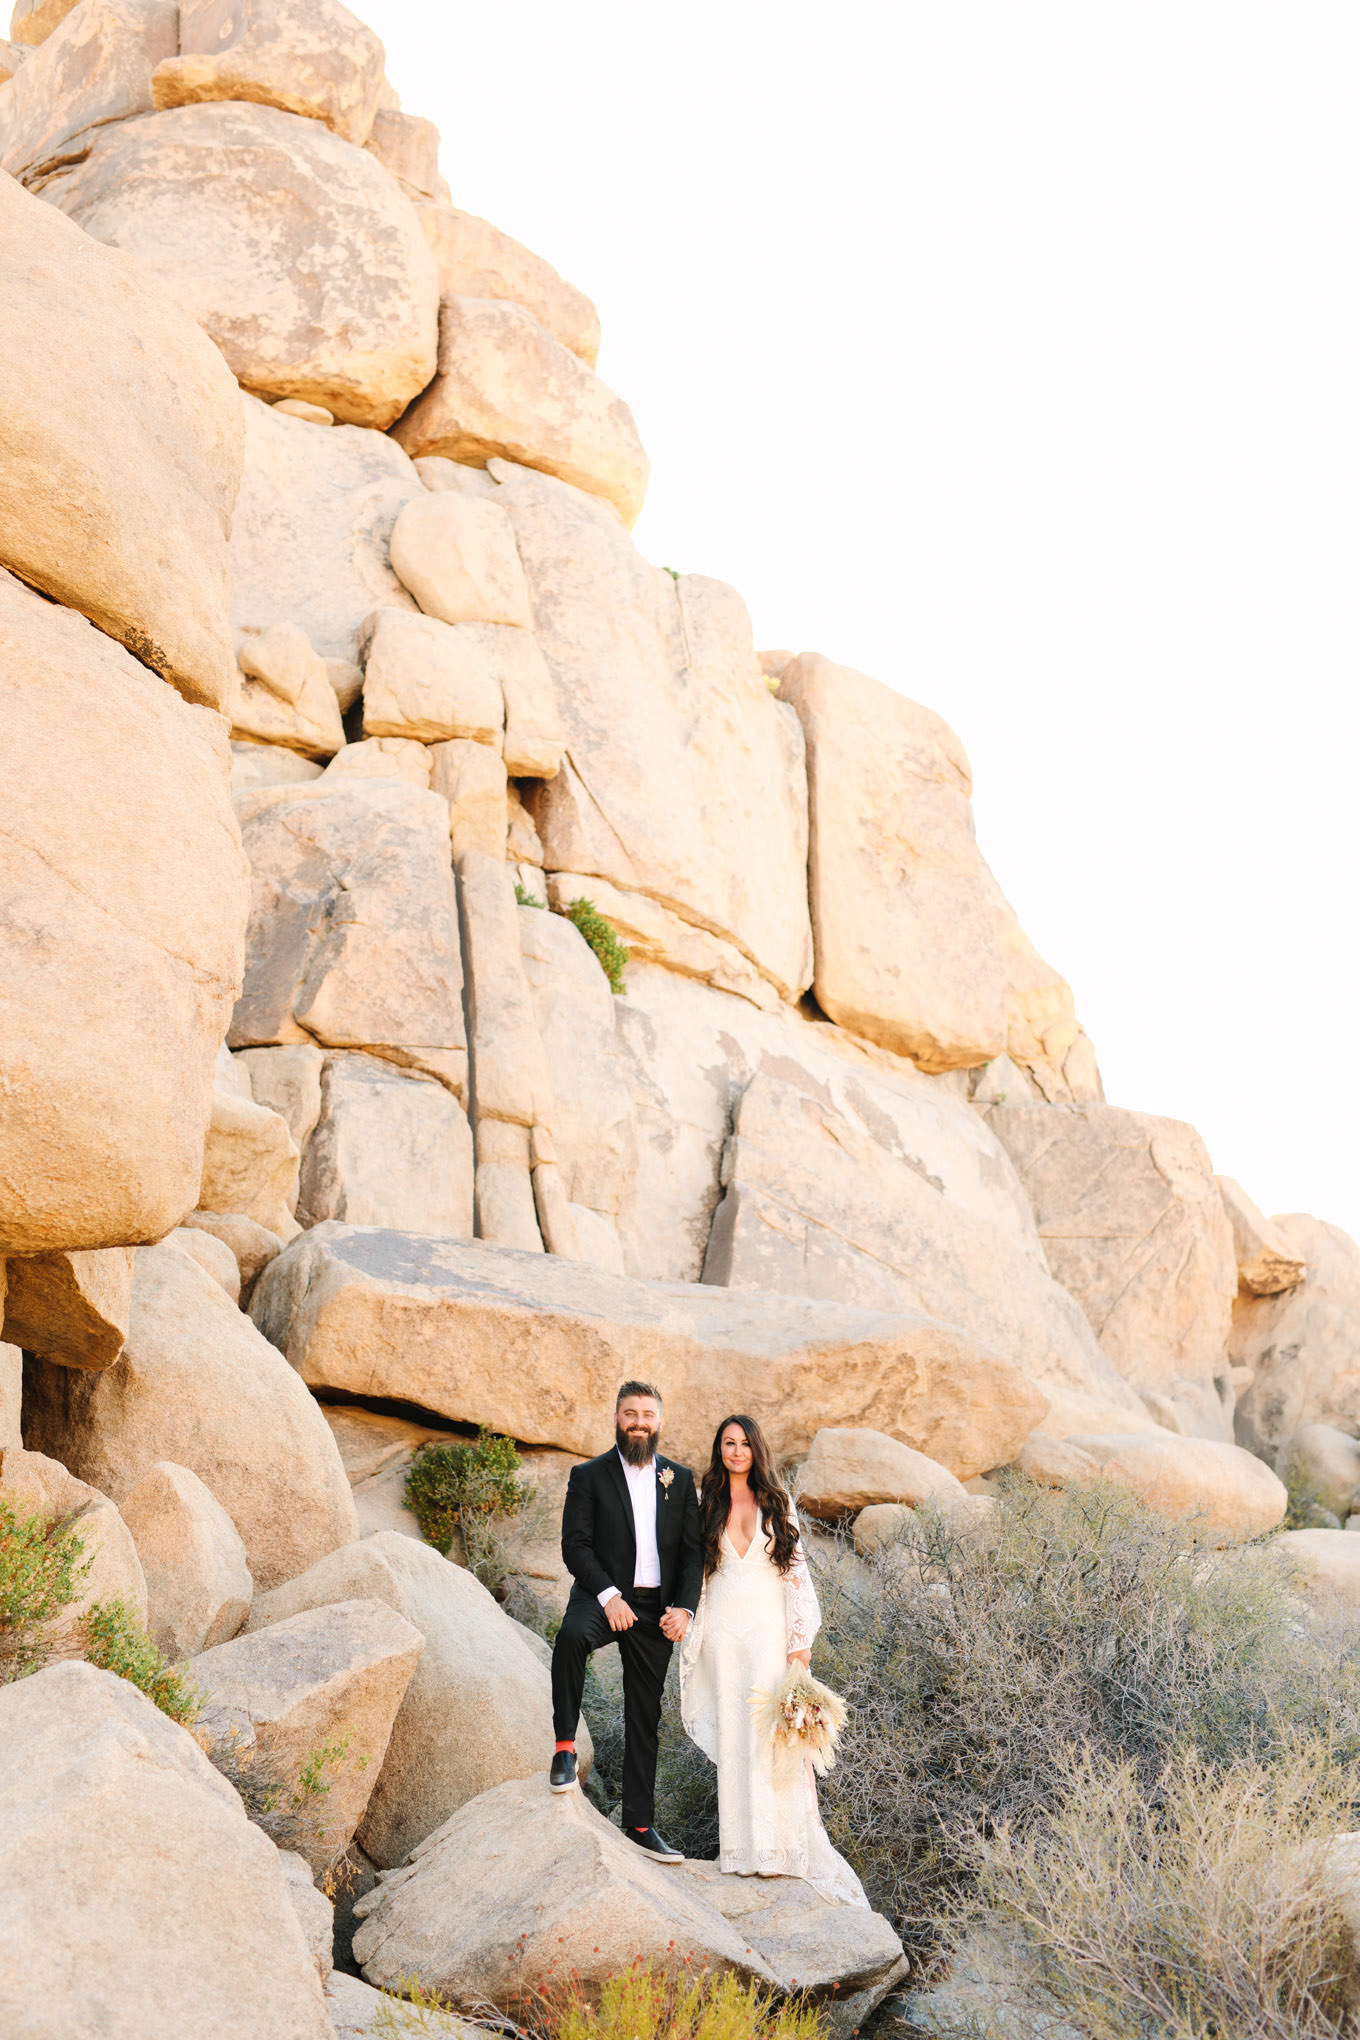 Joshua Tree National Park elopement | Engagement, elopement, and wedding photography roundup of Mary Costa’s favorite images from 2020 | Colorful and elevated photography for fun-loving couples in Southern California | #2020wedding #elopement #weddingphoto #weddingphotography #microwedding   Source: Mary Costa Photography | Los Angeles